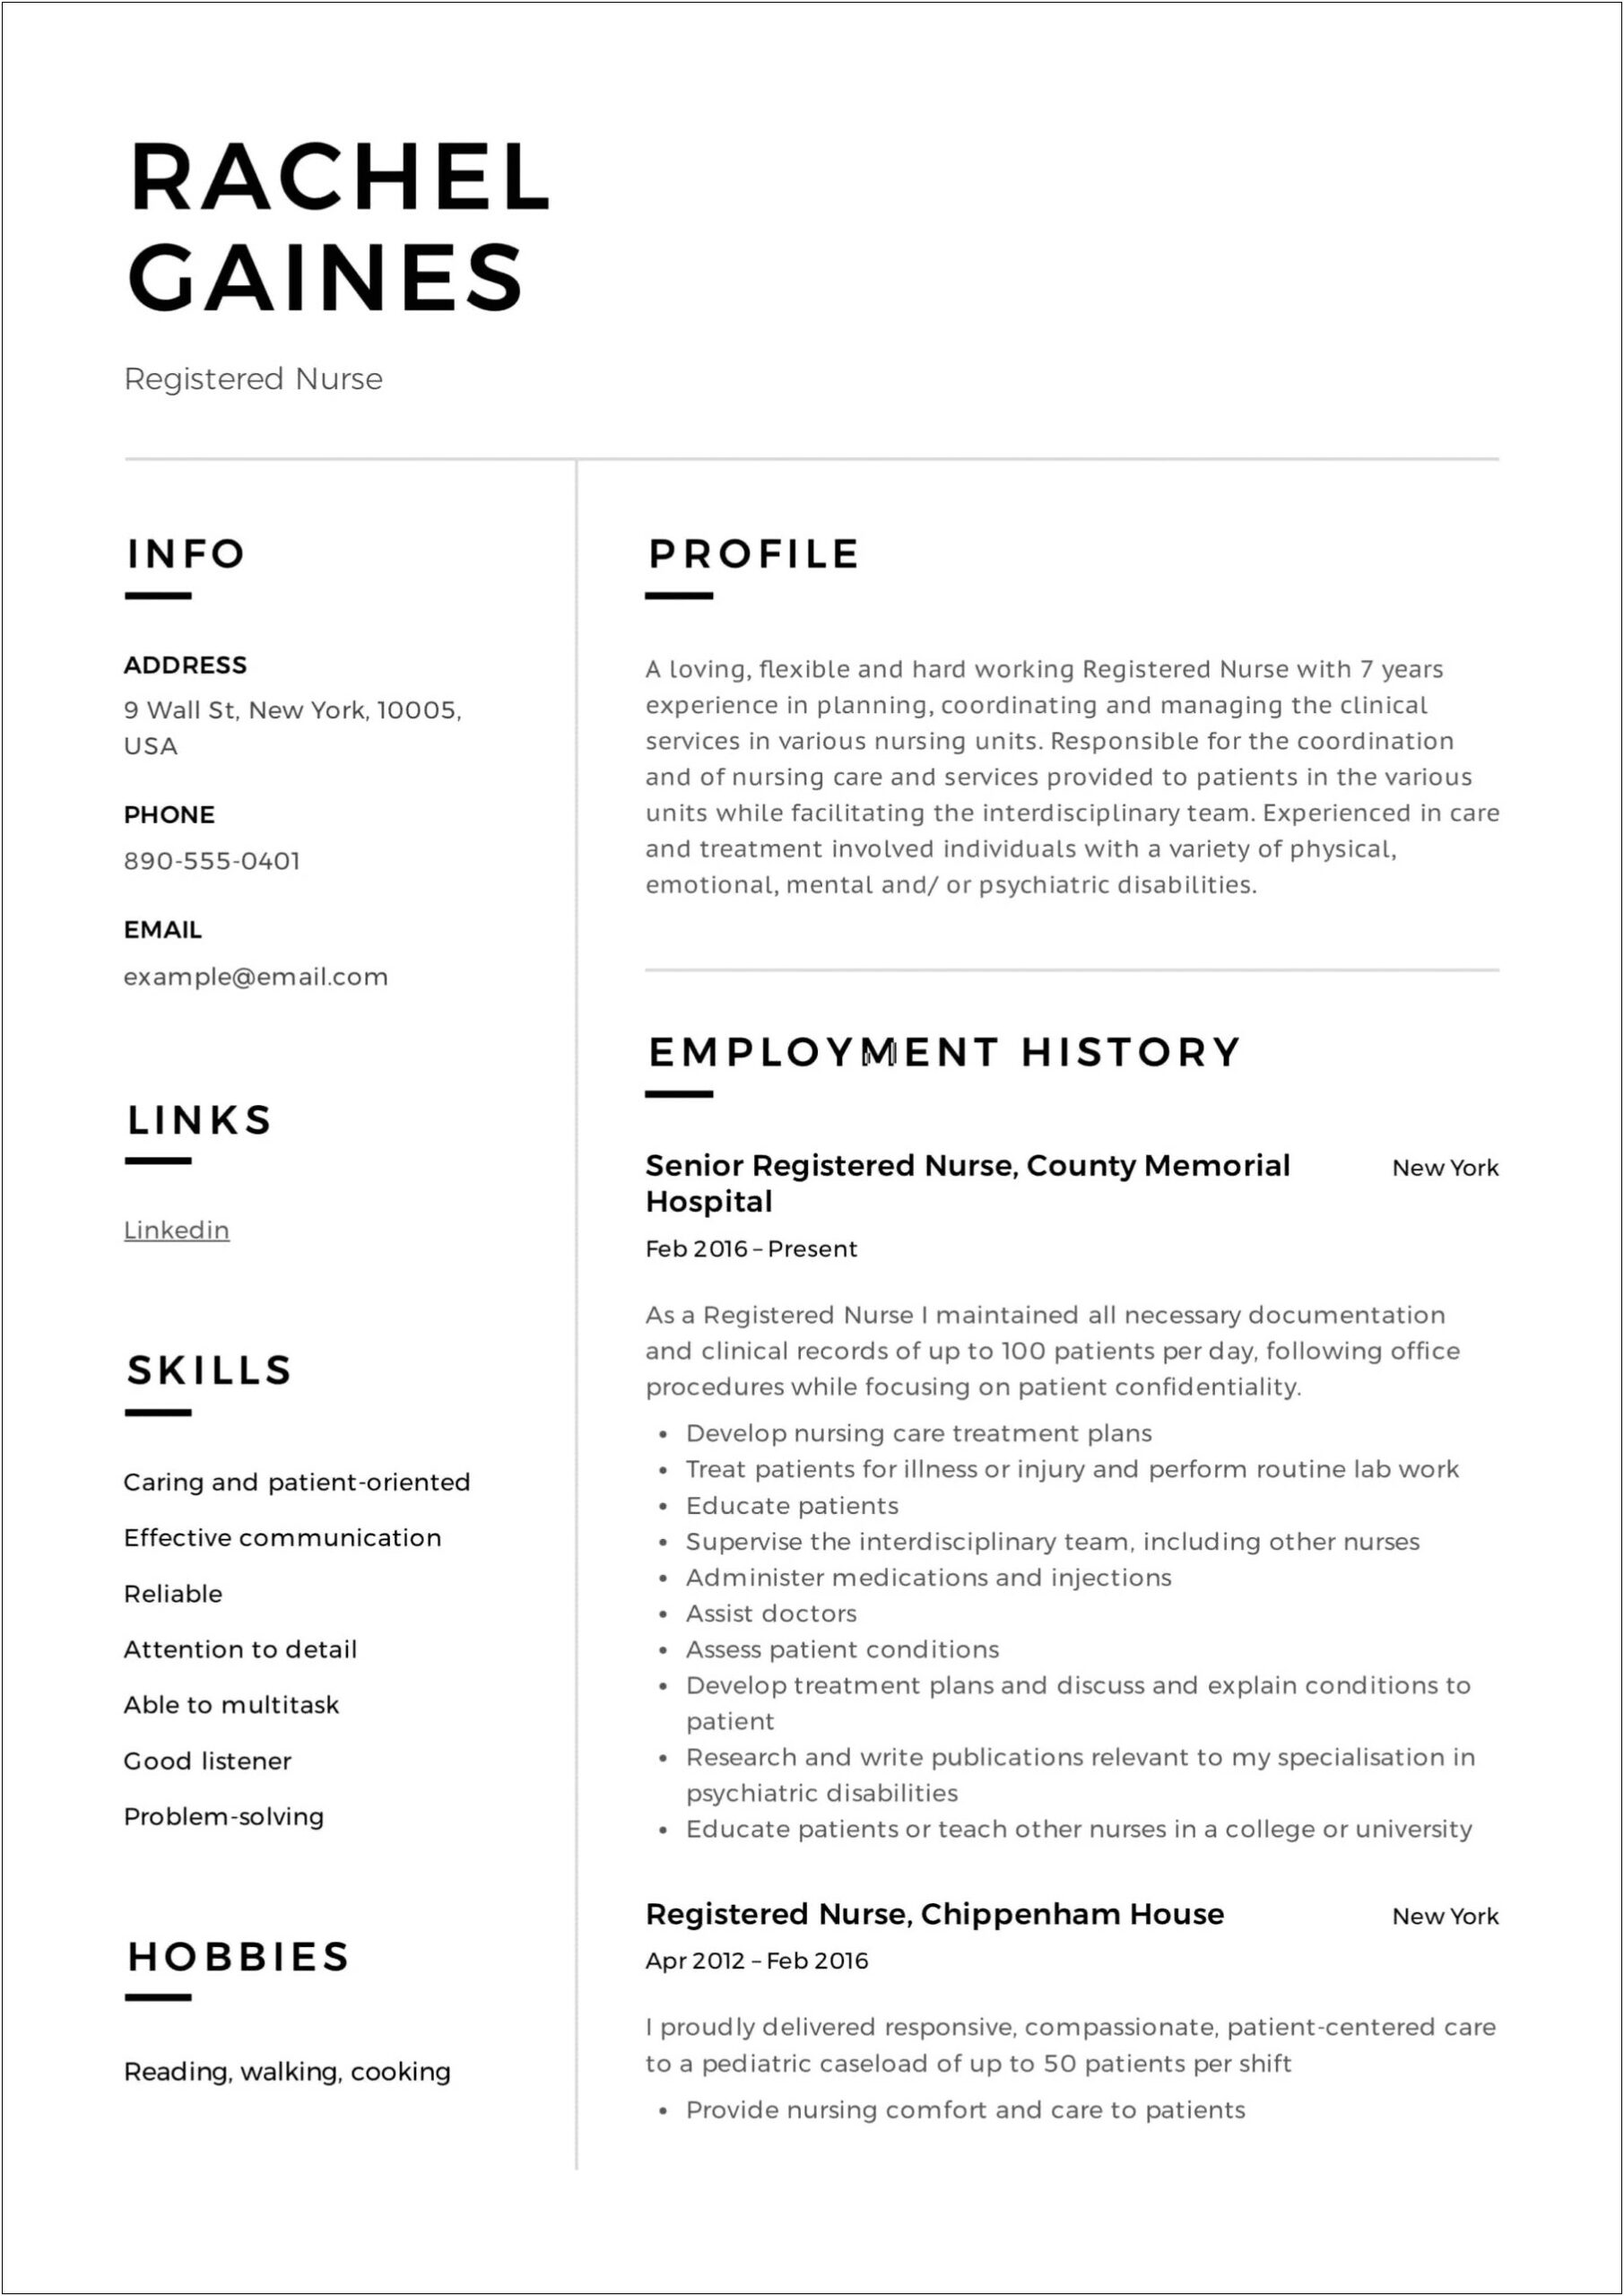 Wallstreet Resume Format After Work Experience